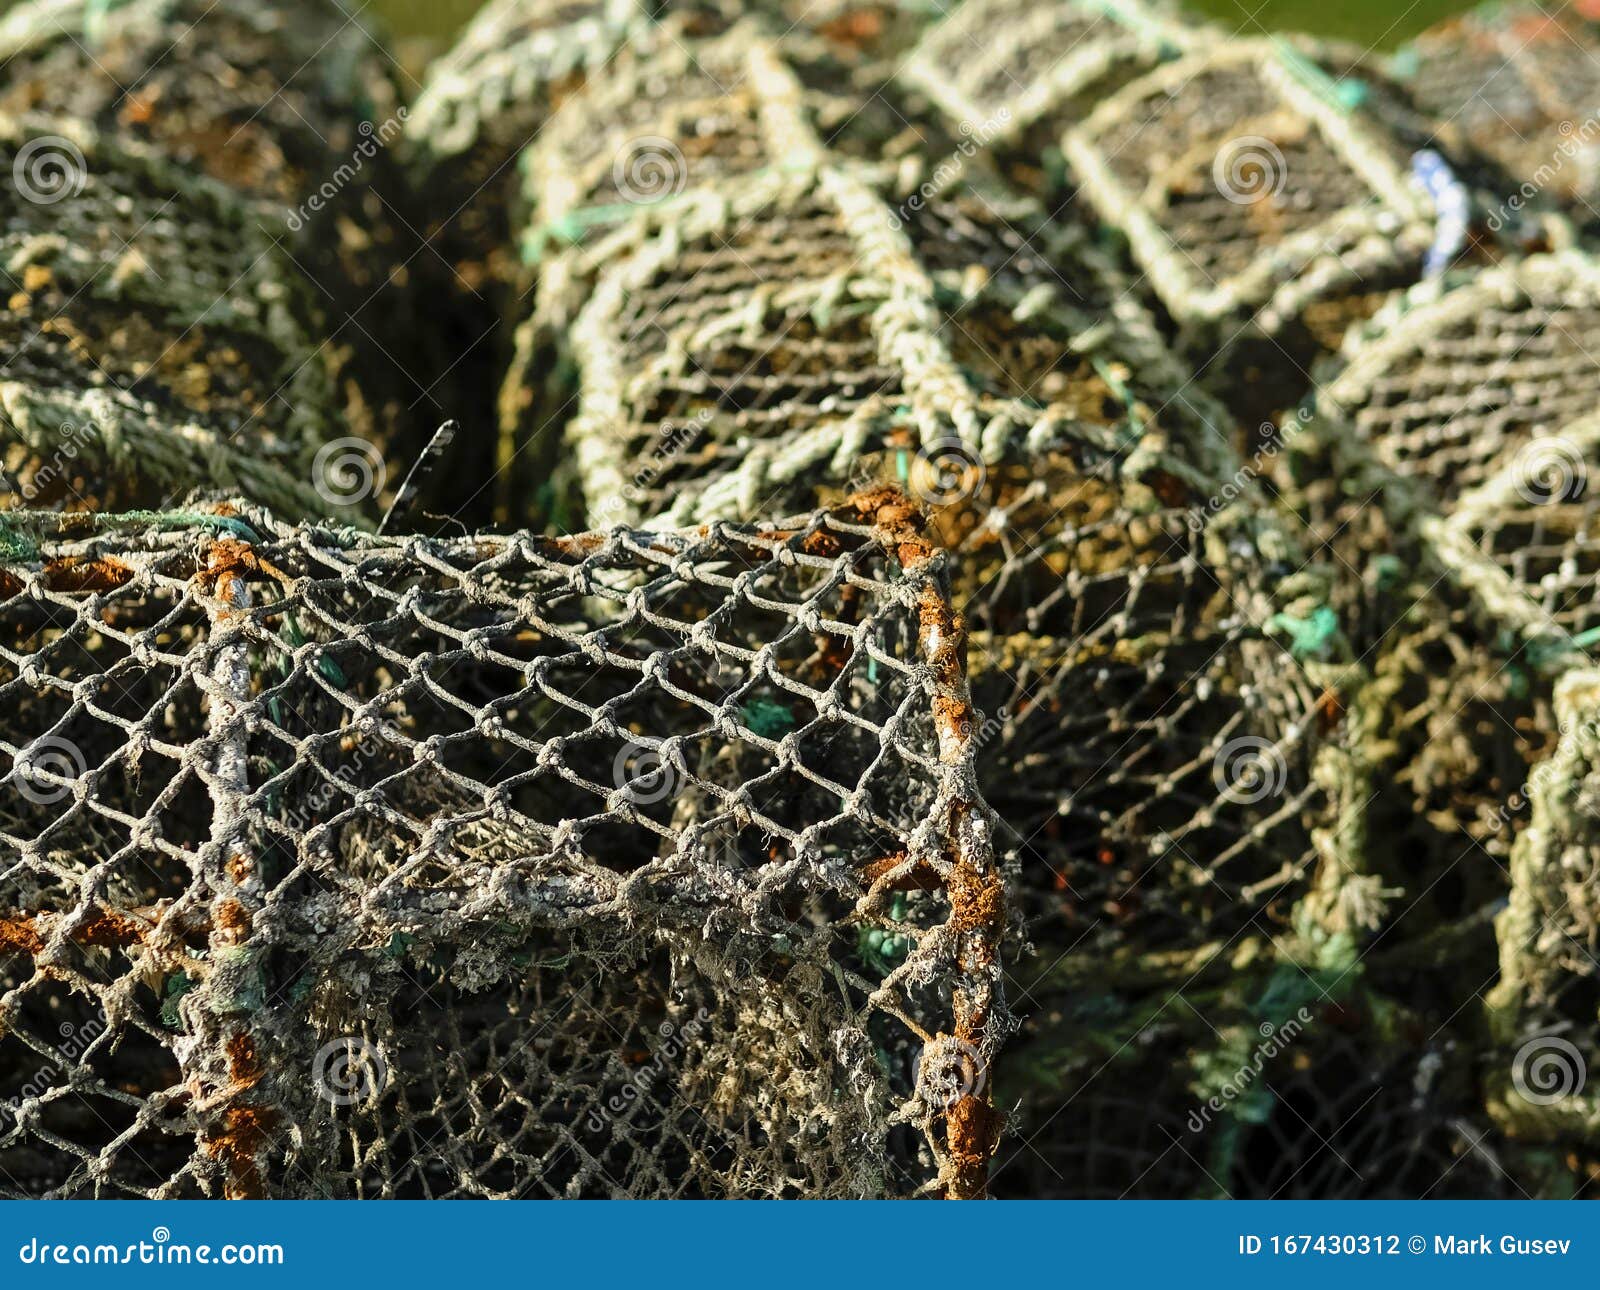 https://thumbs.dreamstime.com/z/old-fishing-traps-selective-focus-used-fish-crab-trap-close-up-rusty-metal-frame-covered-net-167430312.jpg